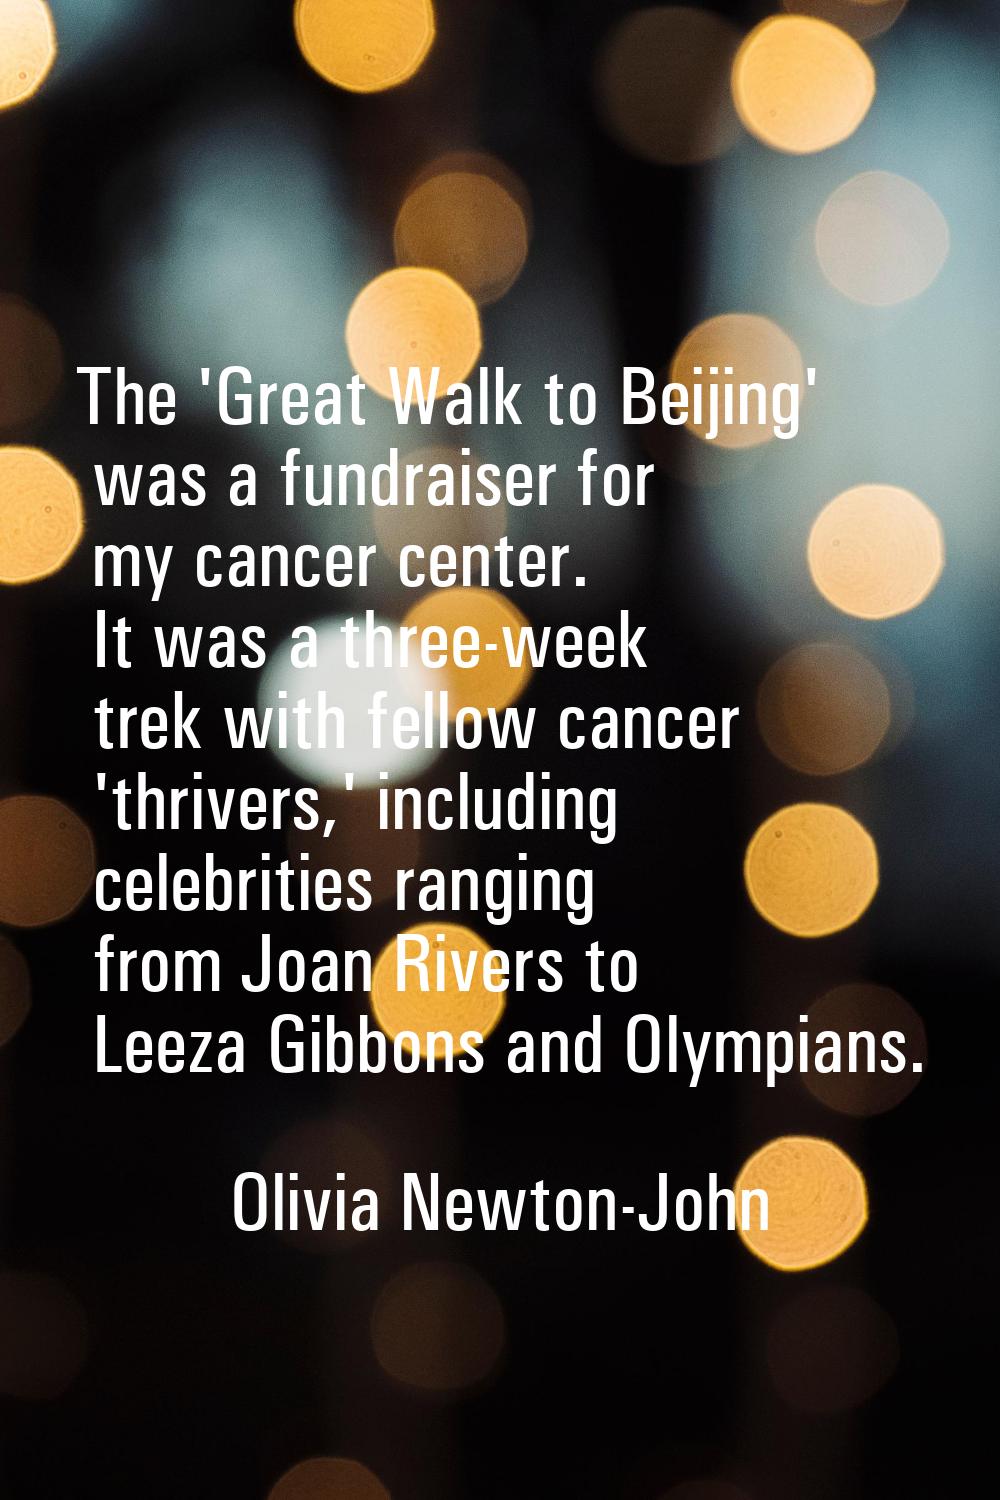 The 'Great Walk to Beijing' was a fundraiser for my cancer center. It was a three-week trek with fe